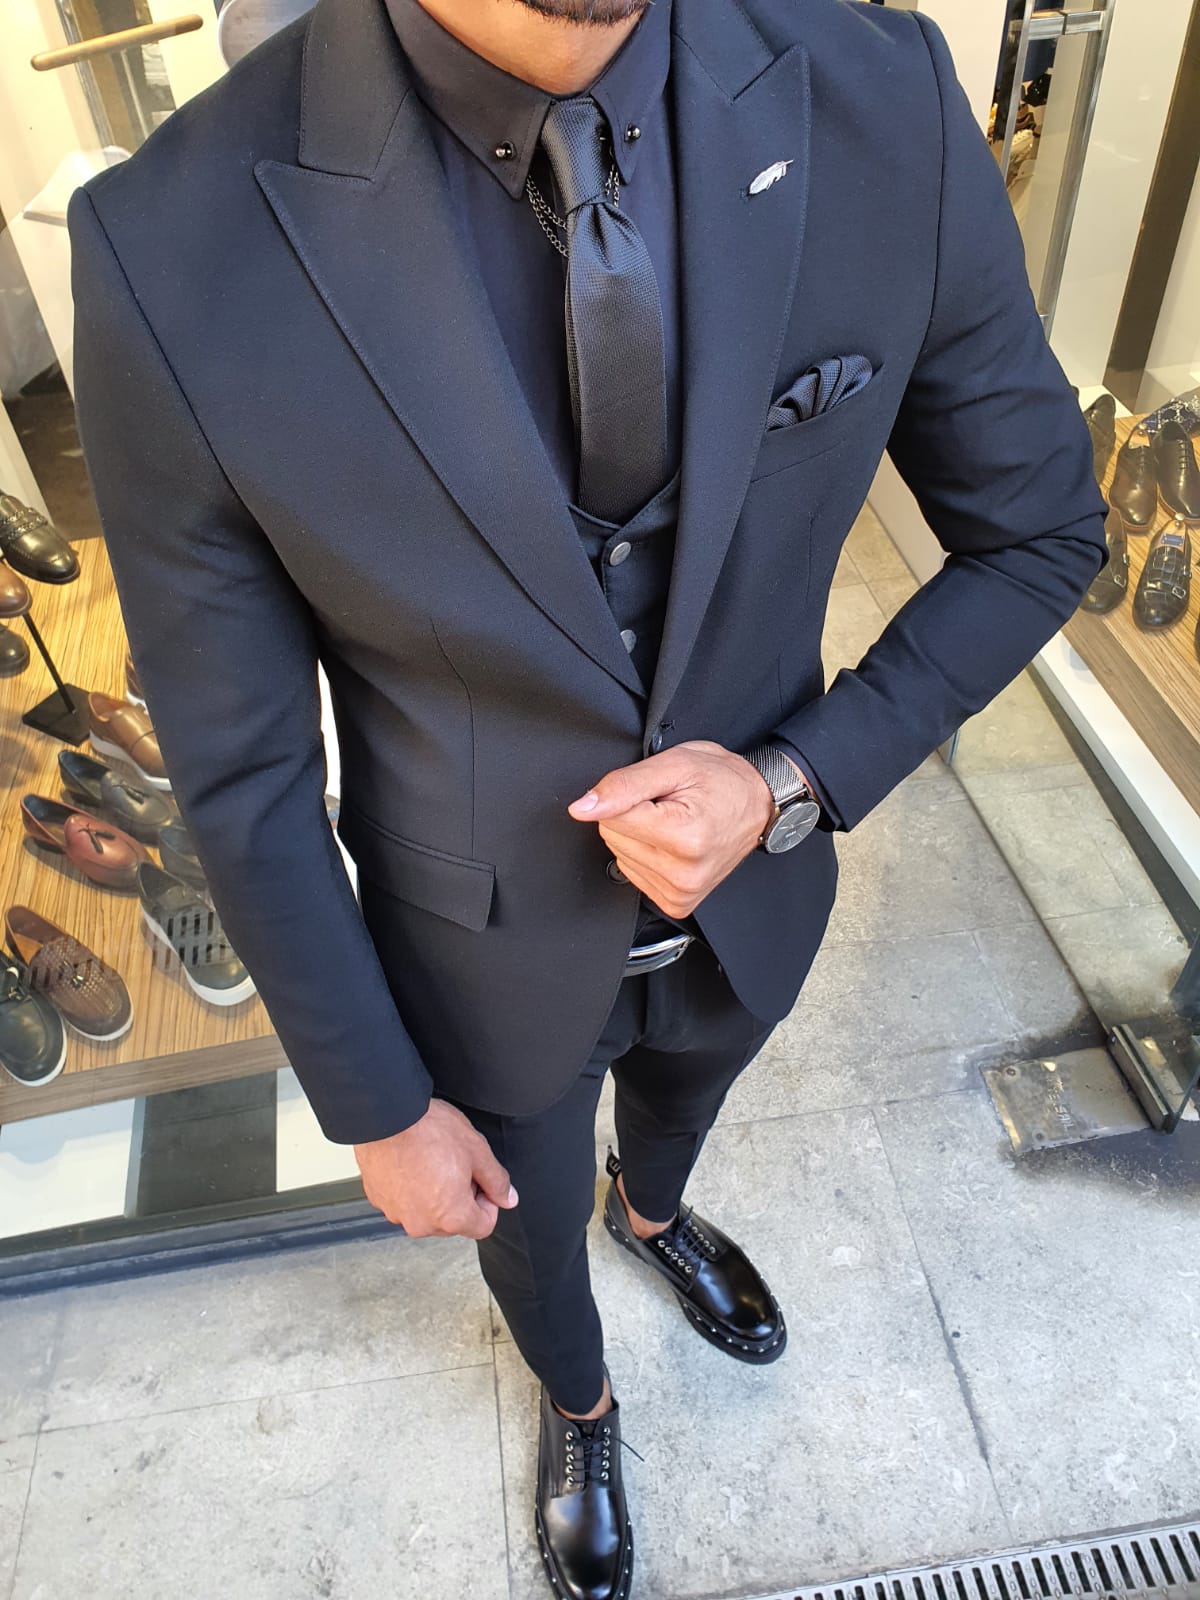 Negar Agresivo Típico Buy Black Slim Fit Suit by GentWith.com with Free Shipping